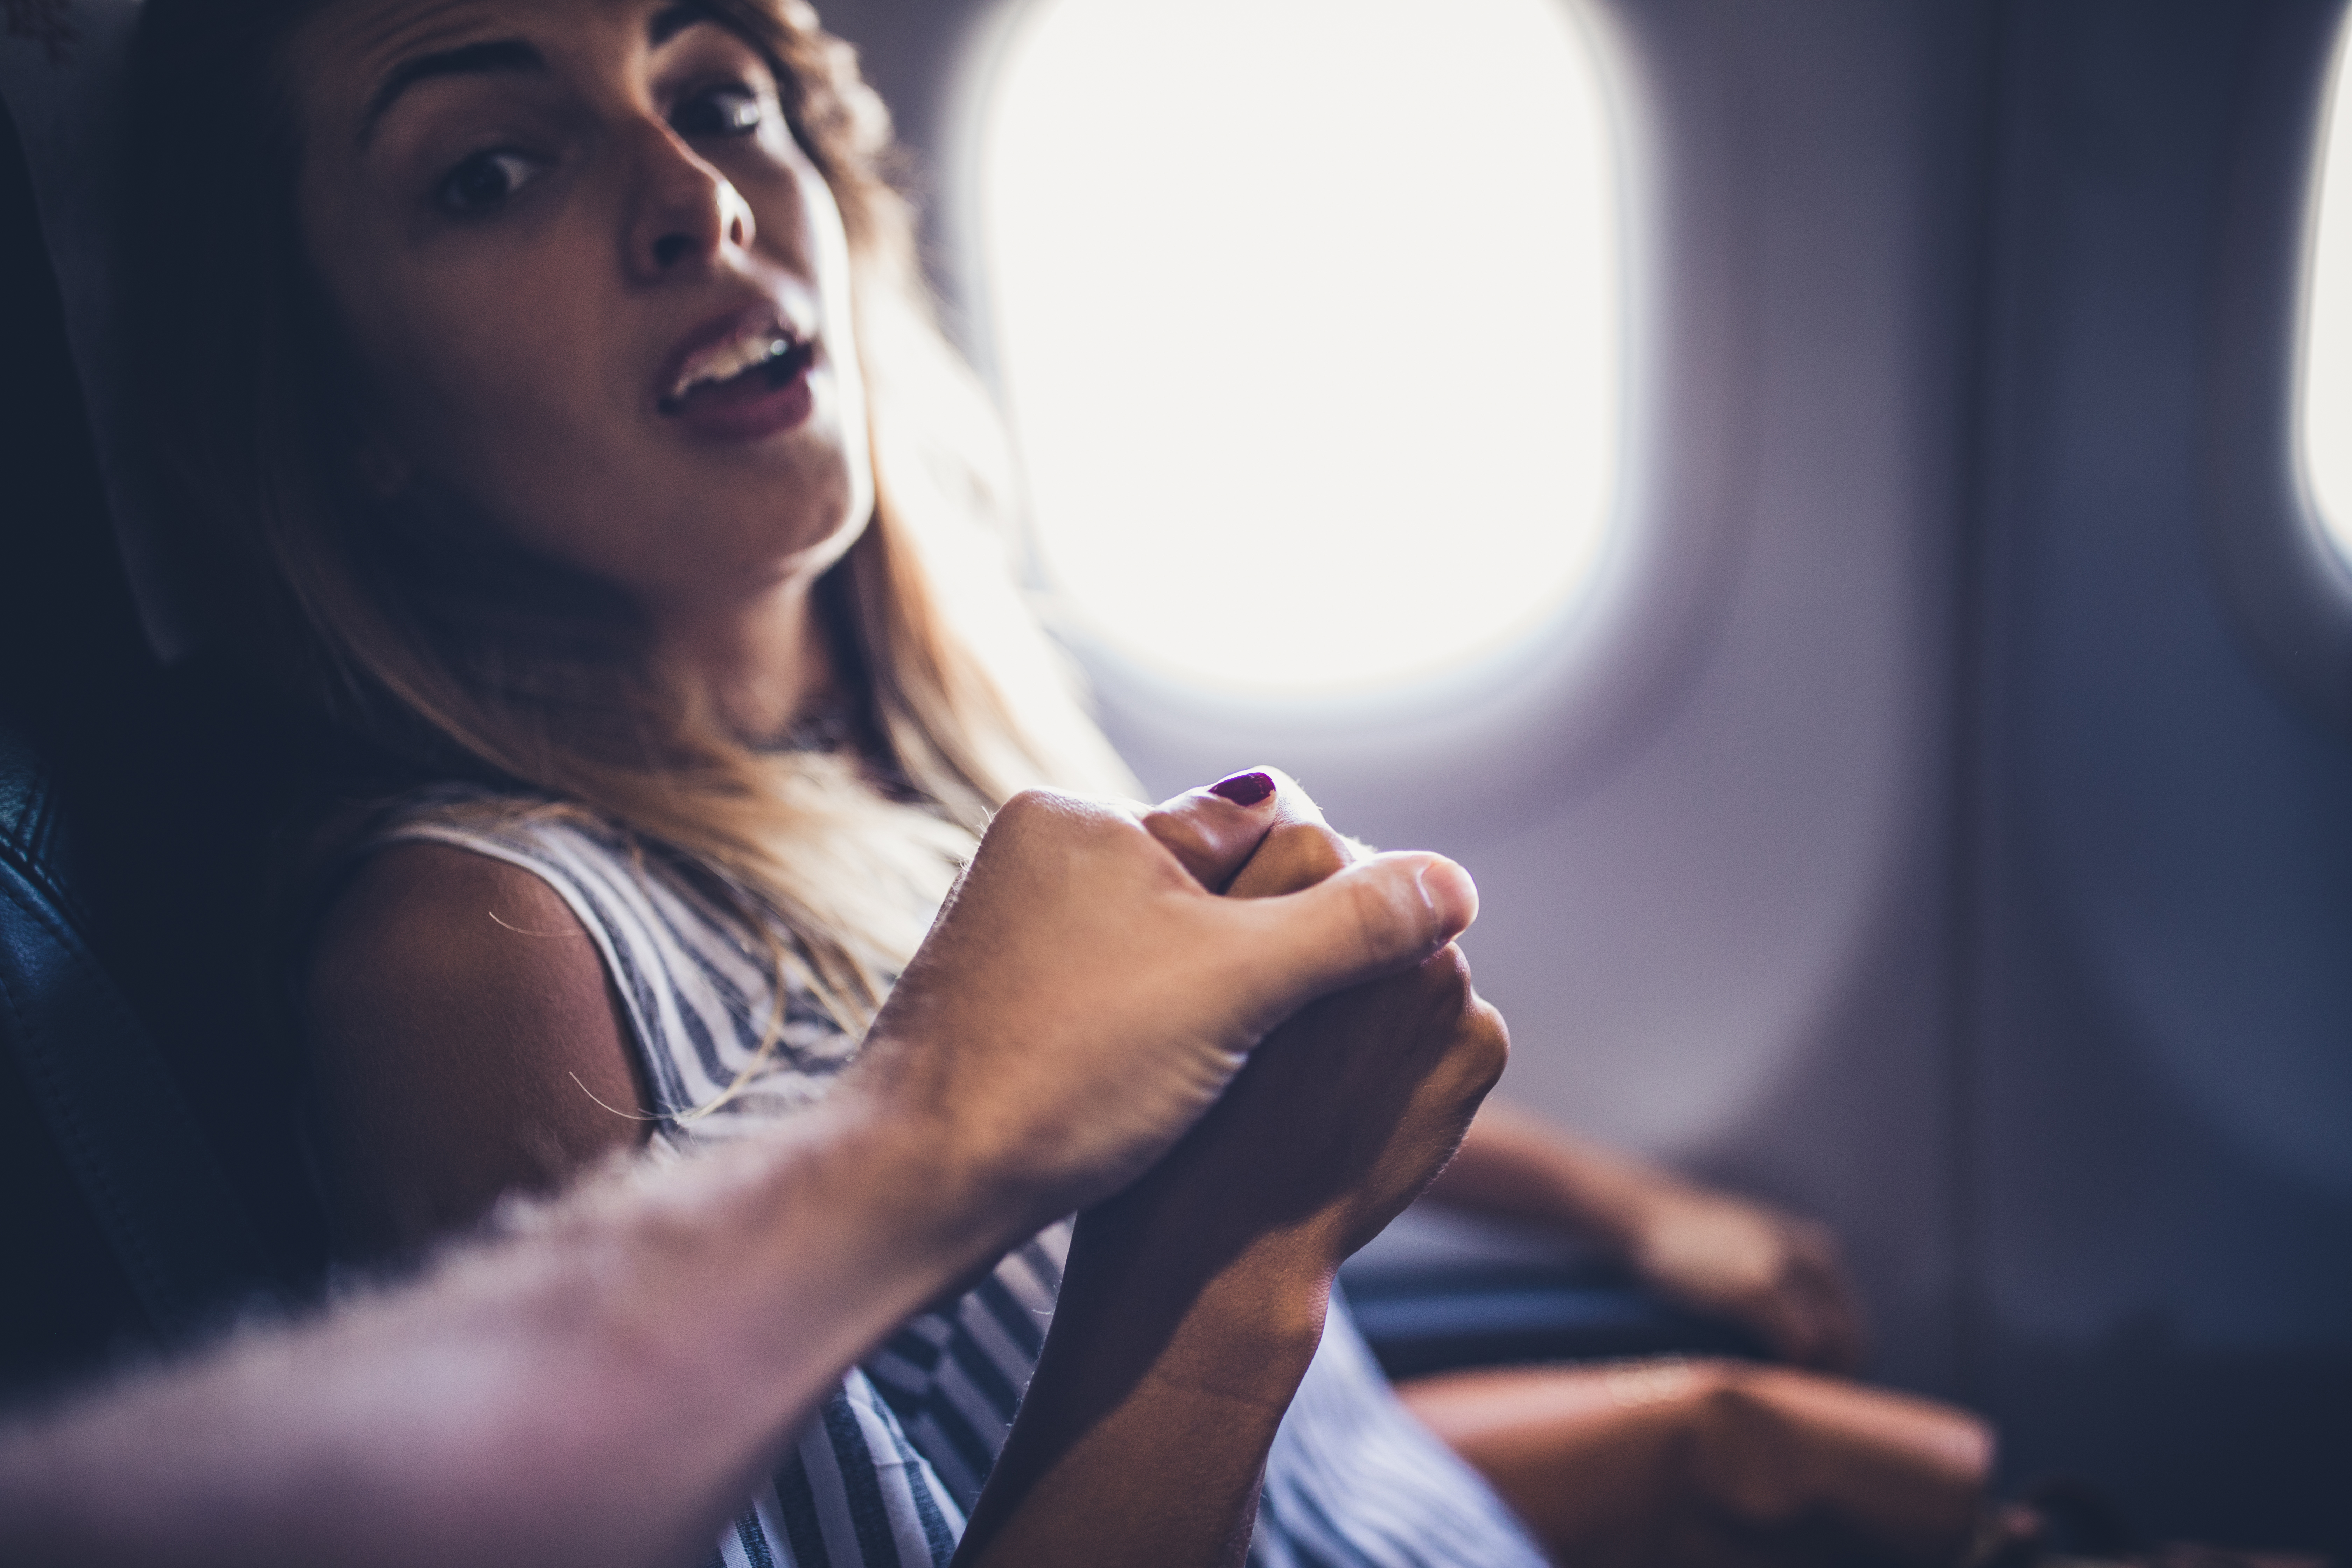 Husband holds scared wife's hand on a plane | Source: Getty Images